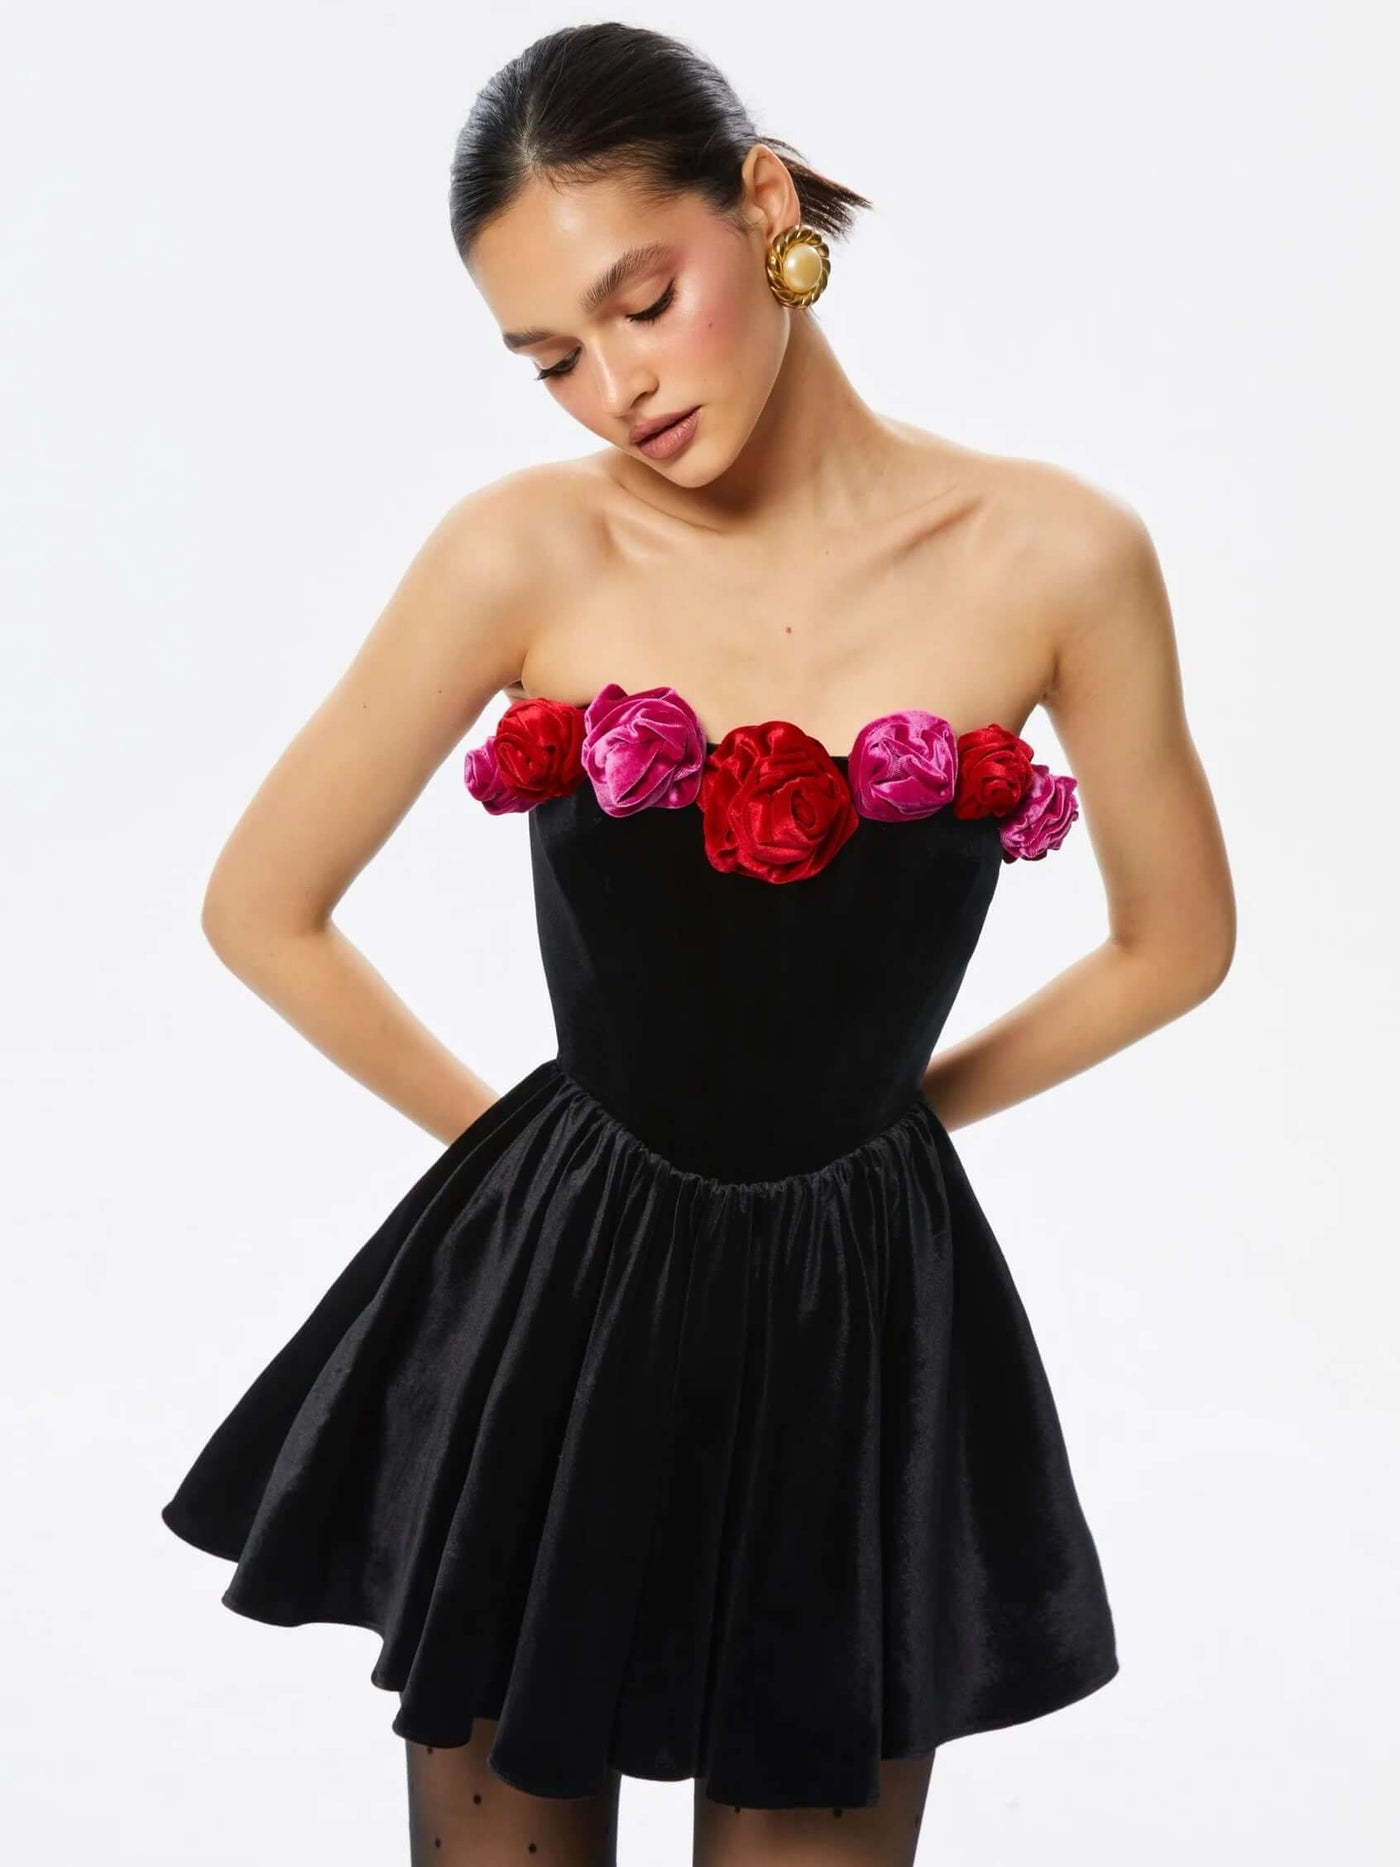 Black halter dress with cutout flower details adorned with sequins